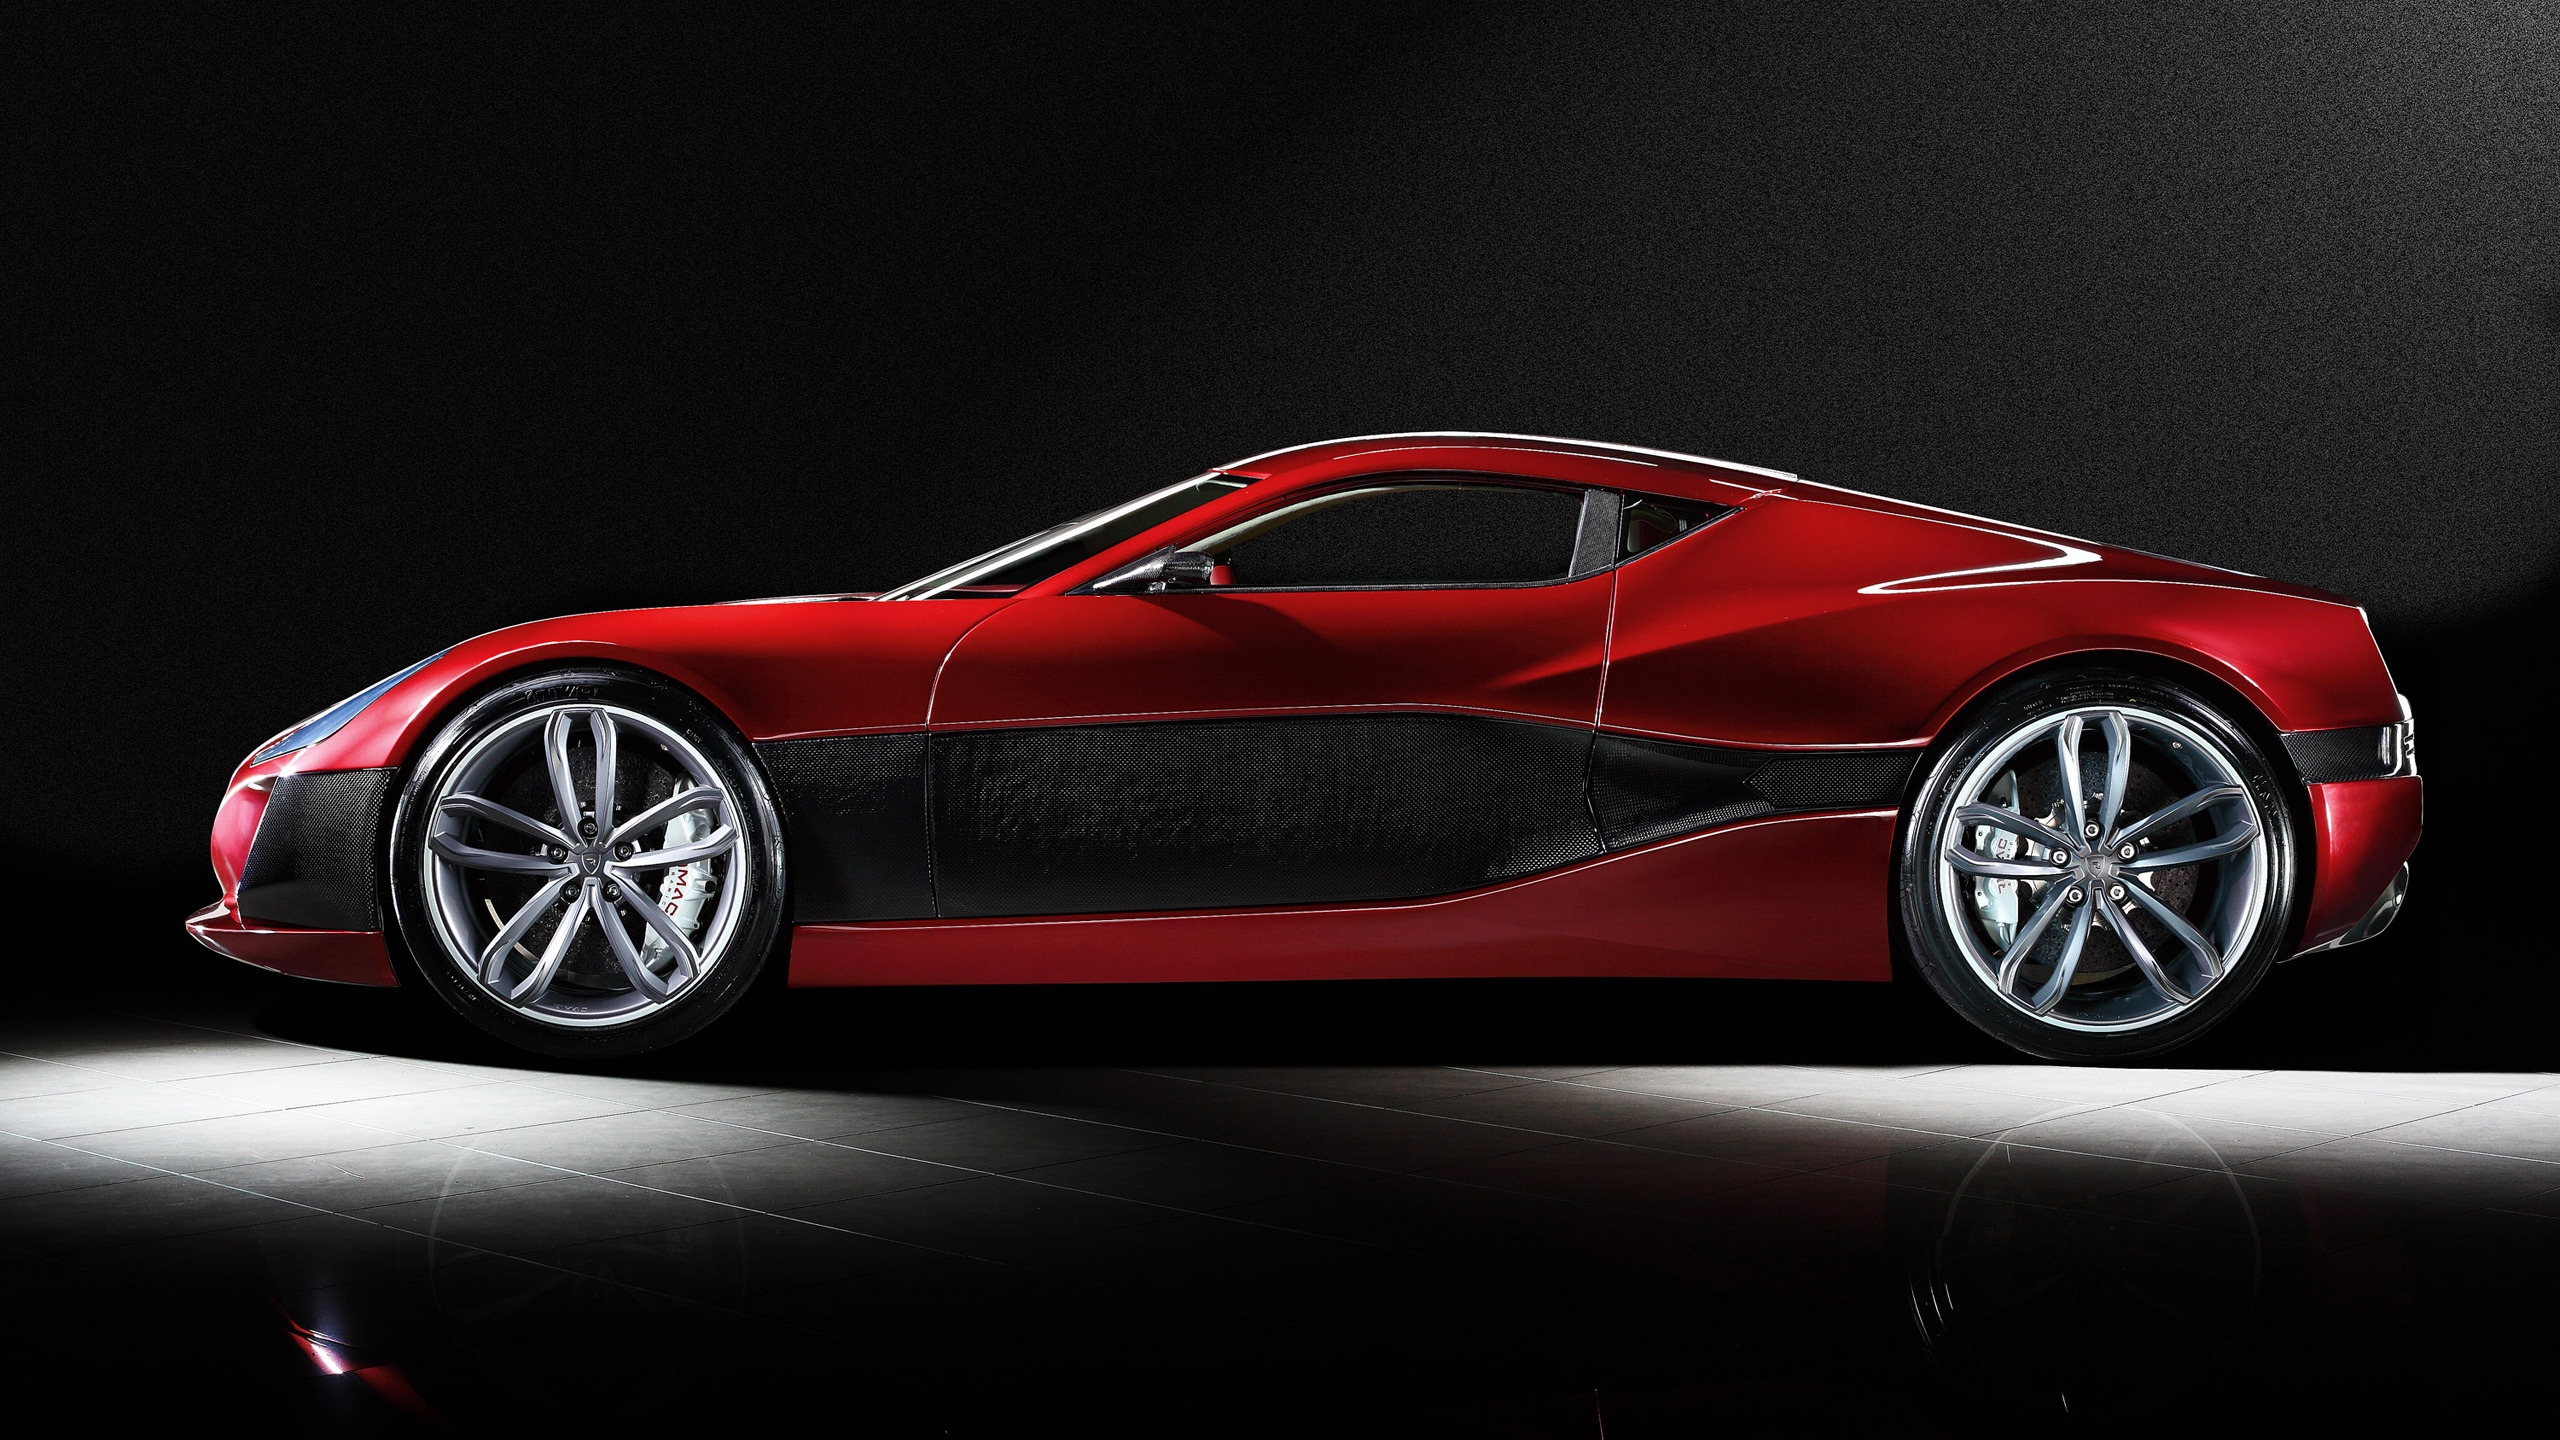 Rimac Concept One Side View for 2560x1440 HDTV resolution